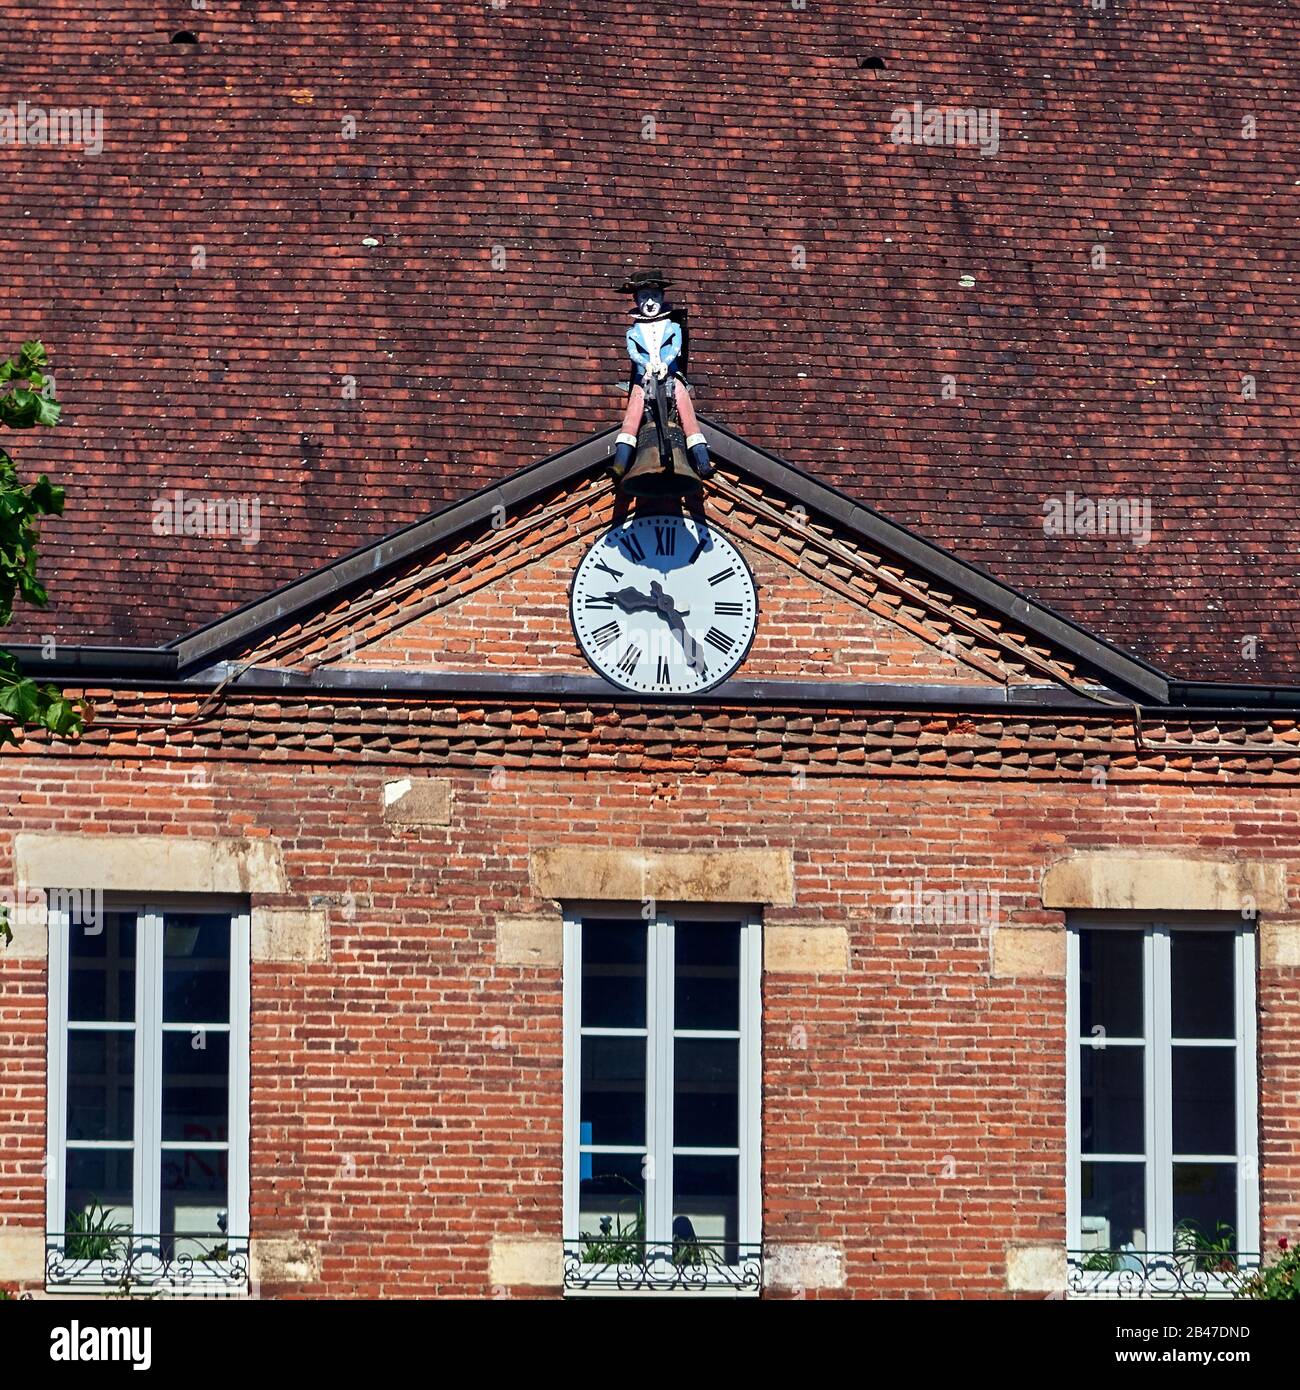 France , Seurre town, Bourgogne-Franche-Comté department, a jacquemart clock on the facade of the girls's school. The jacquemart clock in Seurre is one of the last in France still working. Tjhe automaton's clothes and hat are in French tricolour. It sits astride a beam and holds a hammer linked to the clock by cables which drive it into action. Stock Photo